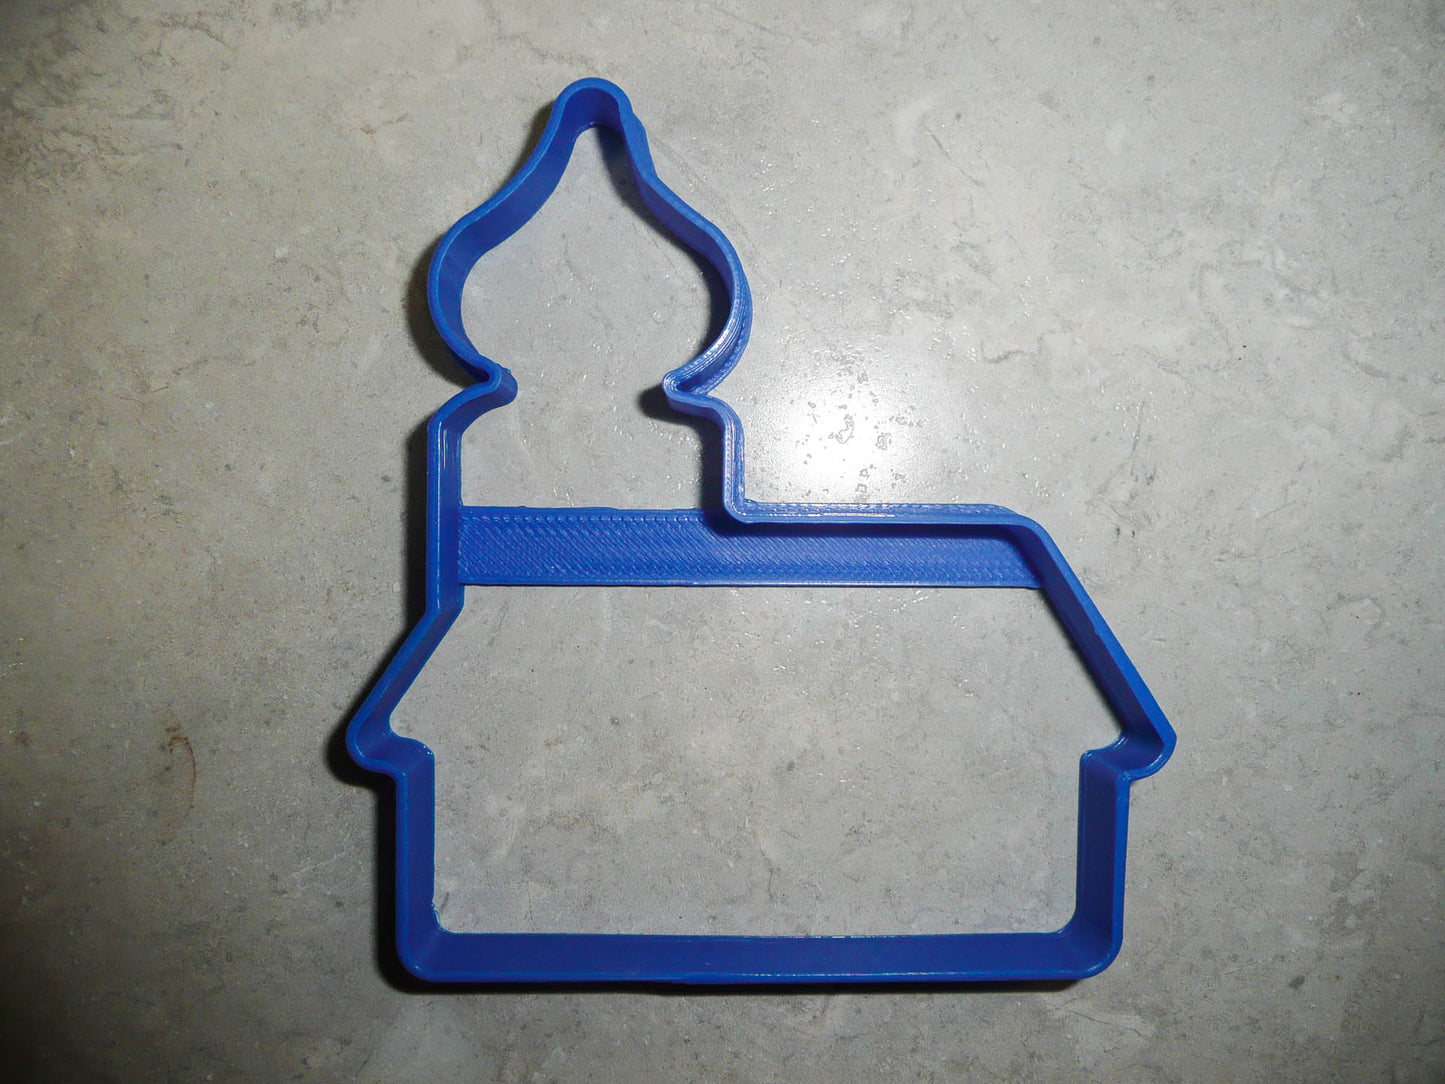 6x House Outline With Dome Steeple Fondant Cutter Cupcake Topper 1.75 IN FD3081